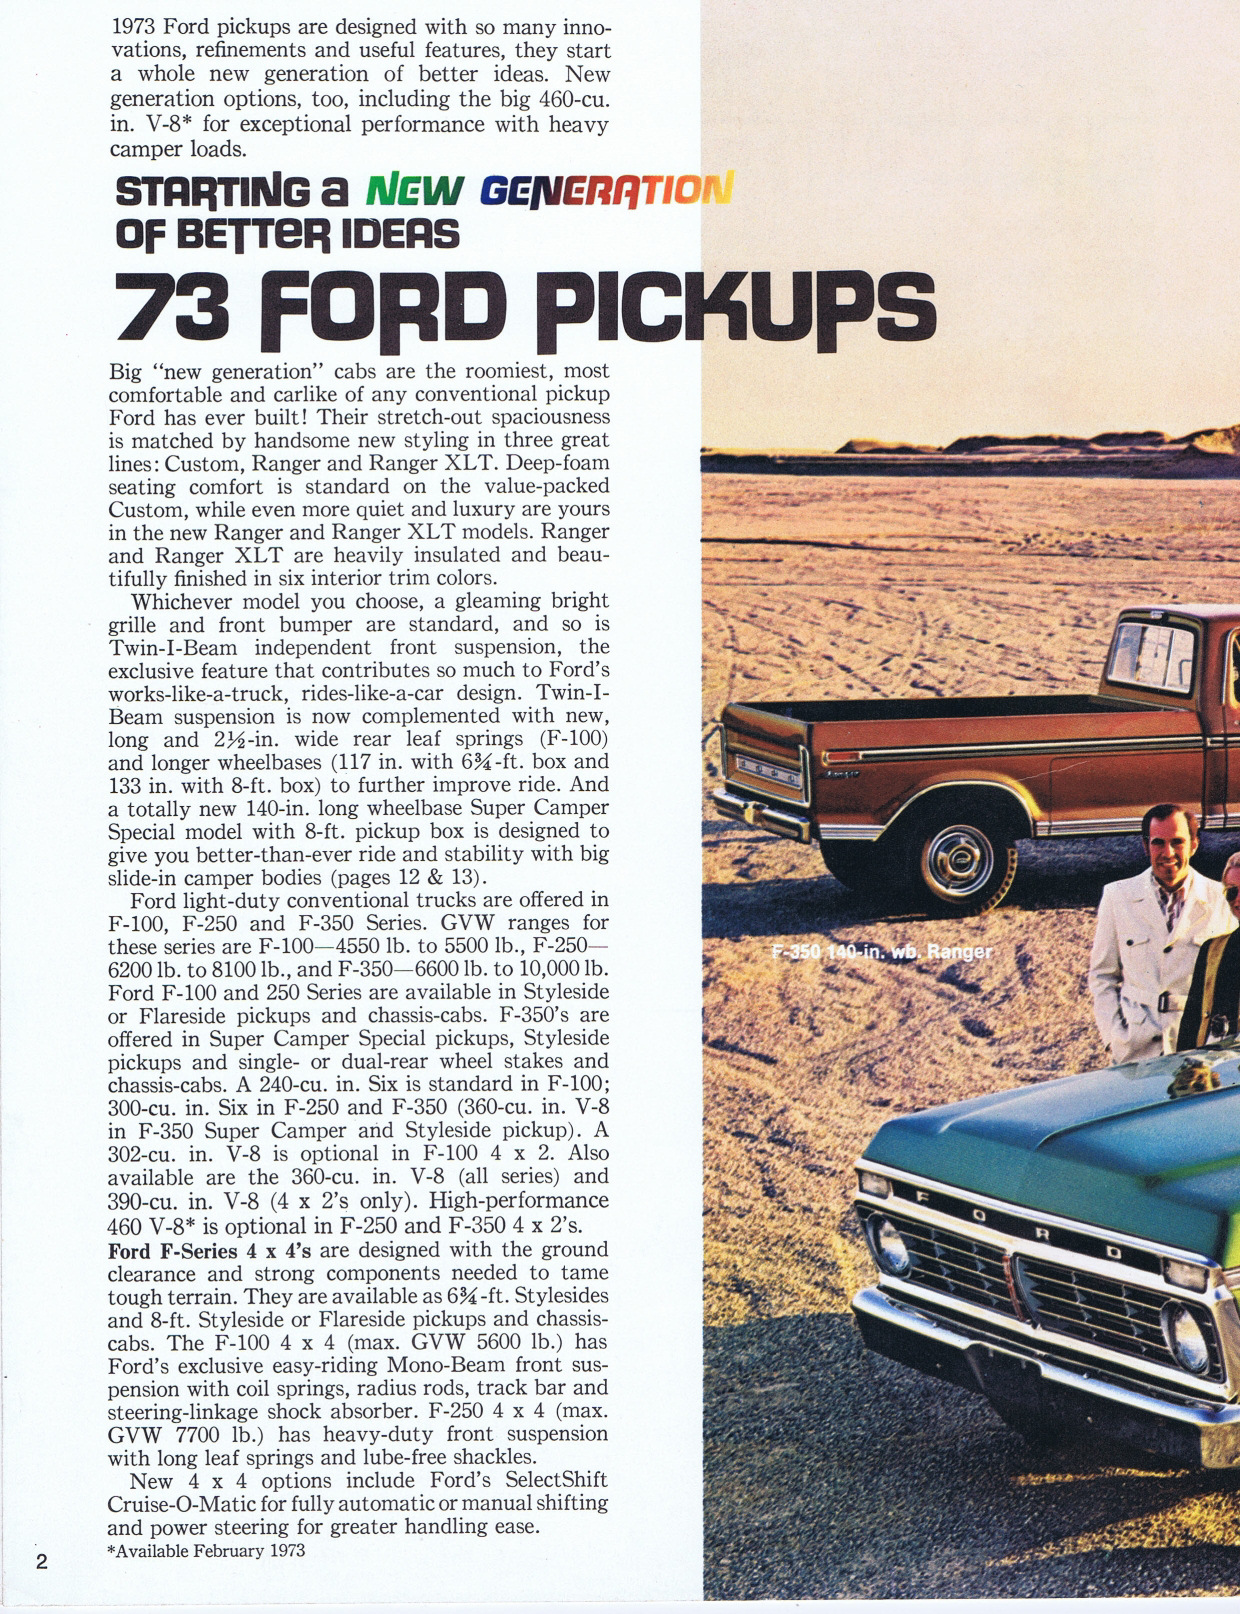 1973_Ford_Pickups-02